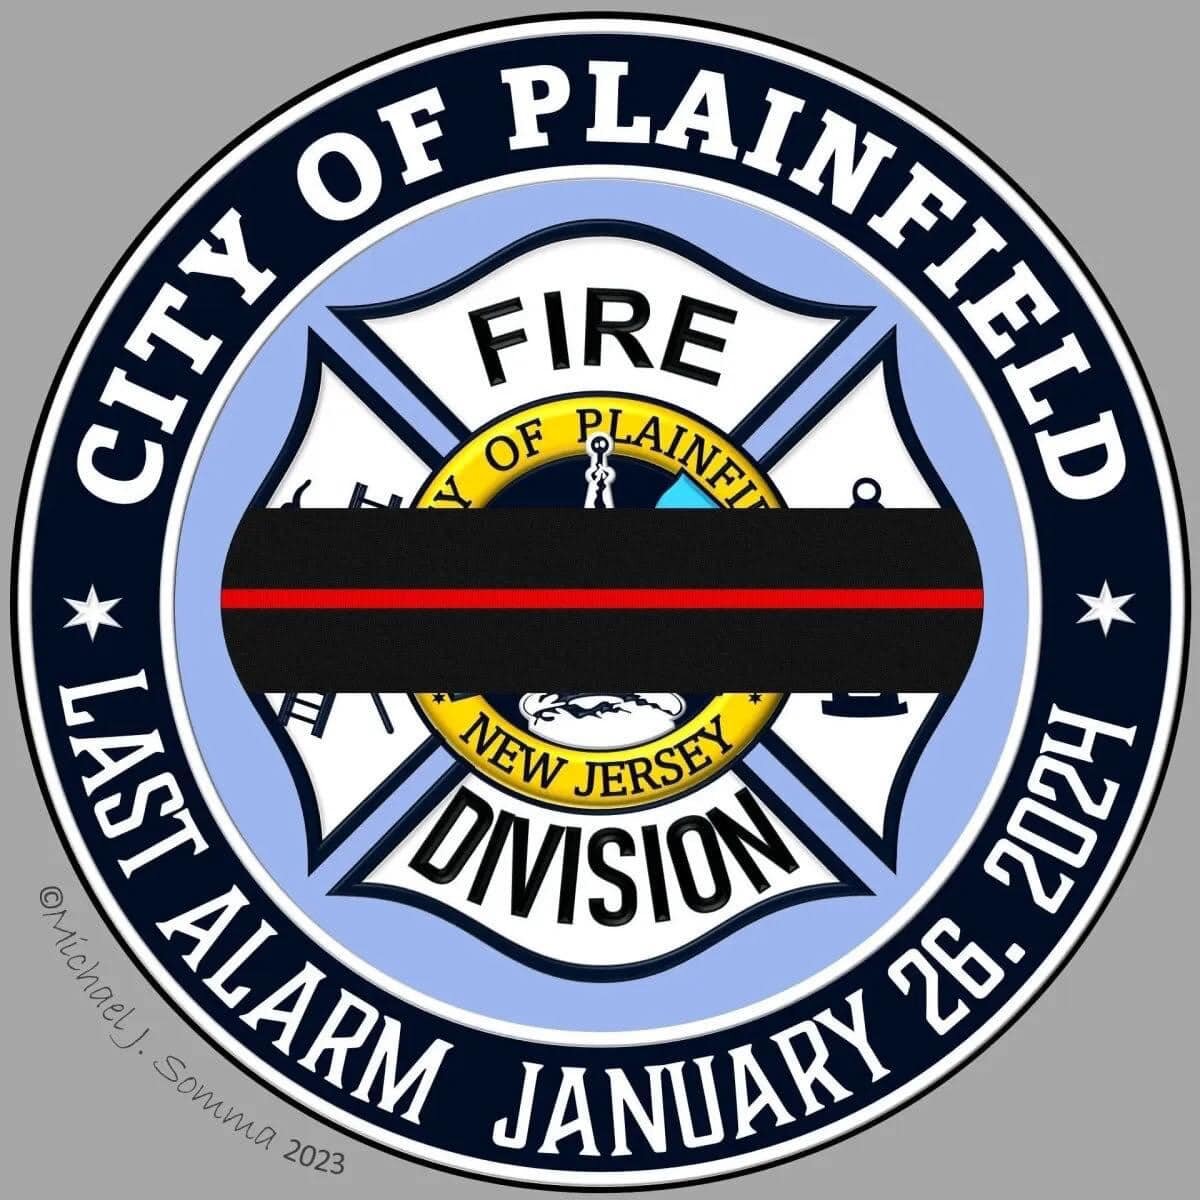 Our thoughts and prayers are with the members of the Plainfield Fire Department and the friends and family of Marques Hudson. May he rest in peace.